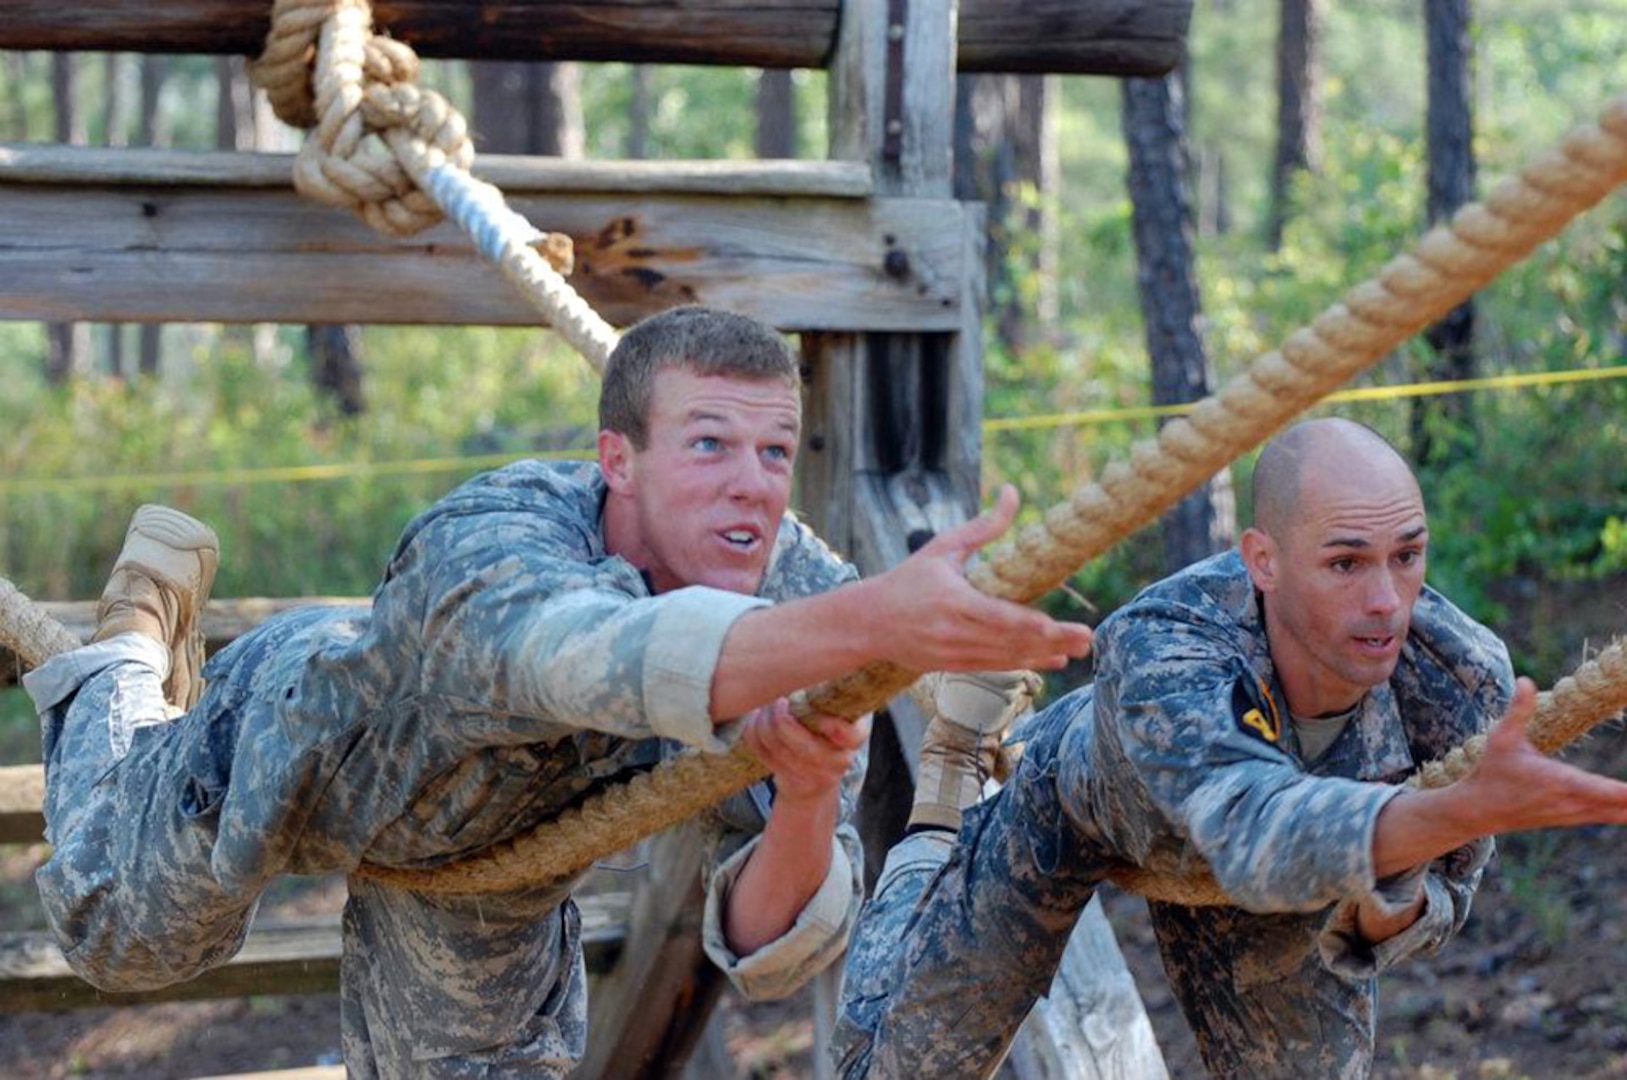 Team 49 during the 29th Annual David E. Grange, Jr. Best Ranger Competition at Fort Benning, Ga., April 13, 2012, made up of (left to right) Army 1st Lt. Nicholas Plocar with the Wisconsin Army National Guard and Army Capt Robert Killian with the Colorado Army National Guard, complete the commando crawl obstacle during the first day of the. Killian and Plocar placed sixth overall in the competition.